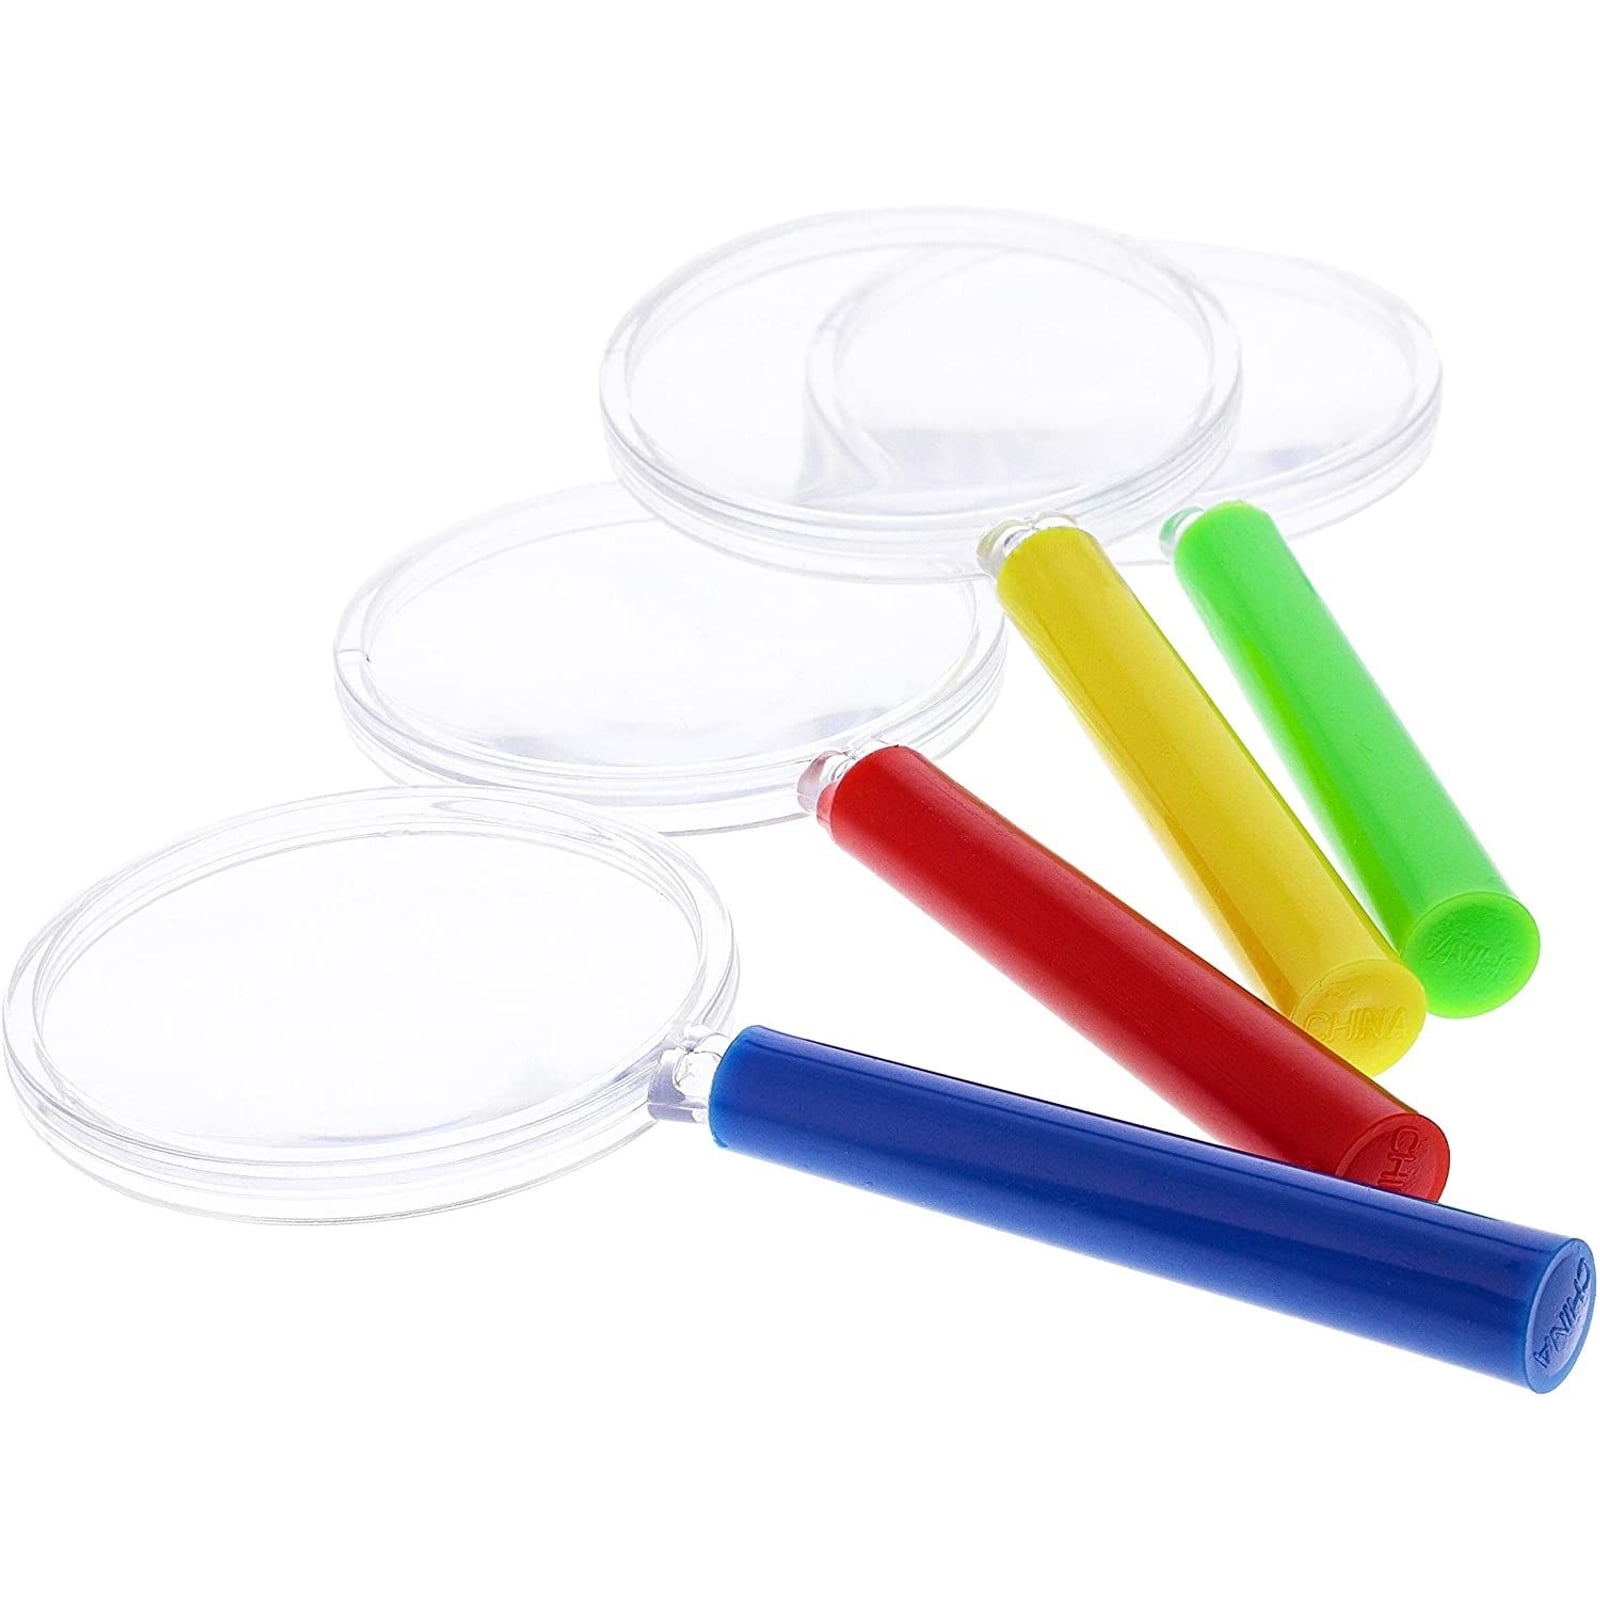 Child's Magnifying Glass Toy Loot/Party Bag Fillers Kids School Prize Santa 